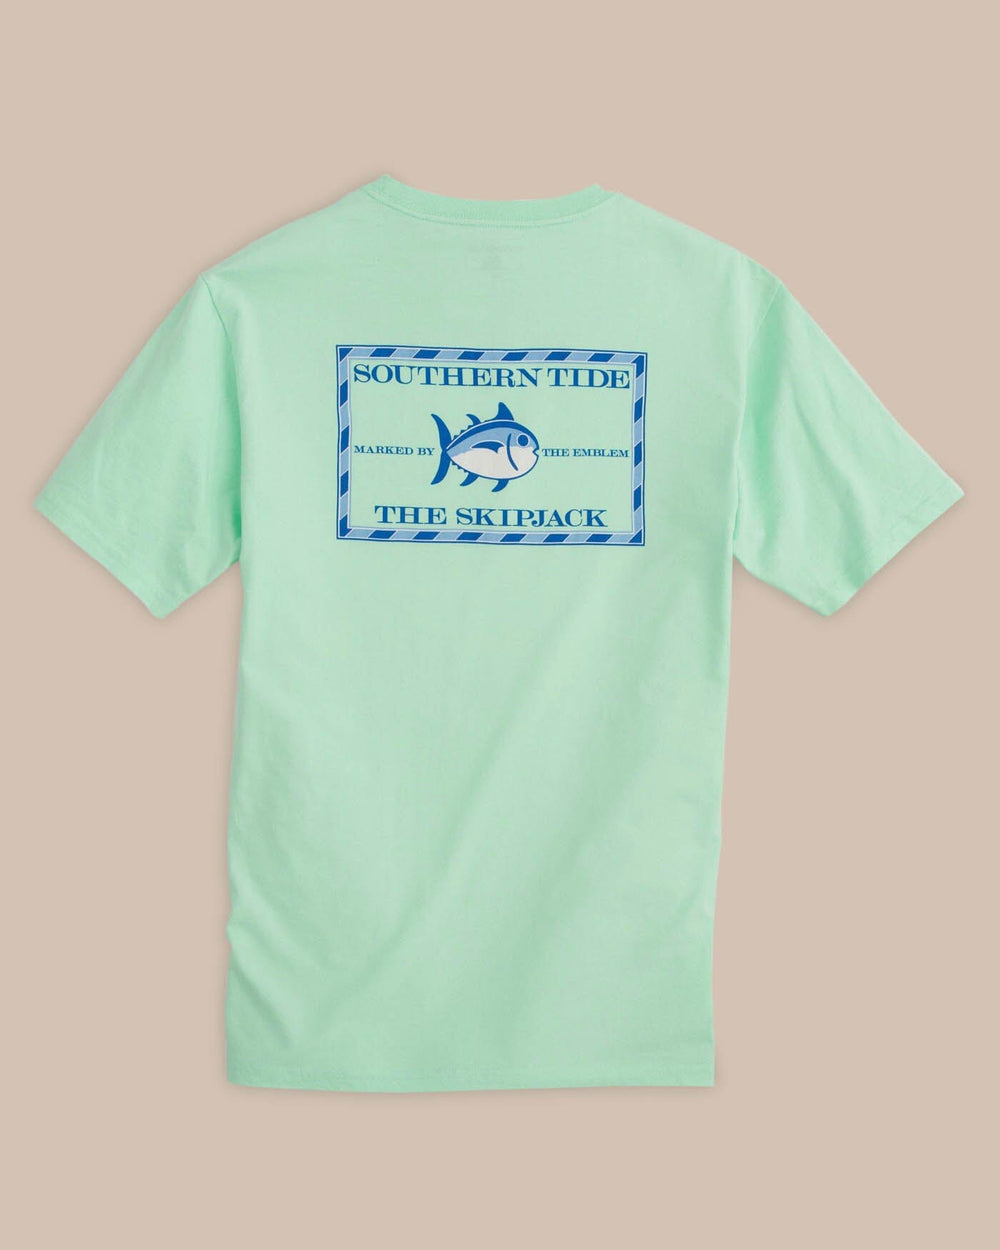 The back view of the Men's Green Original Skipjack Short Sleeve T-Shirt by Southern Tide - Offshore Green